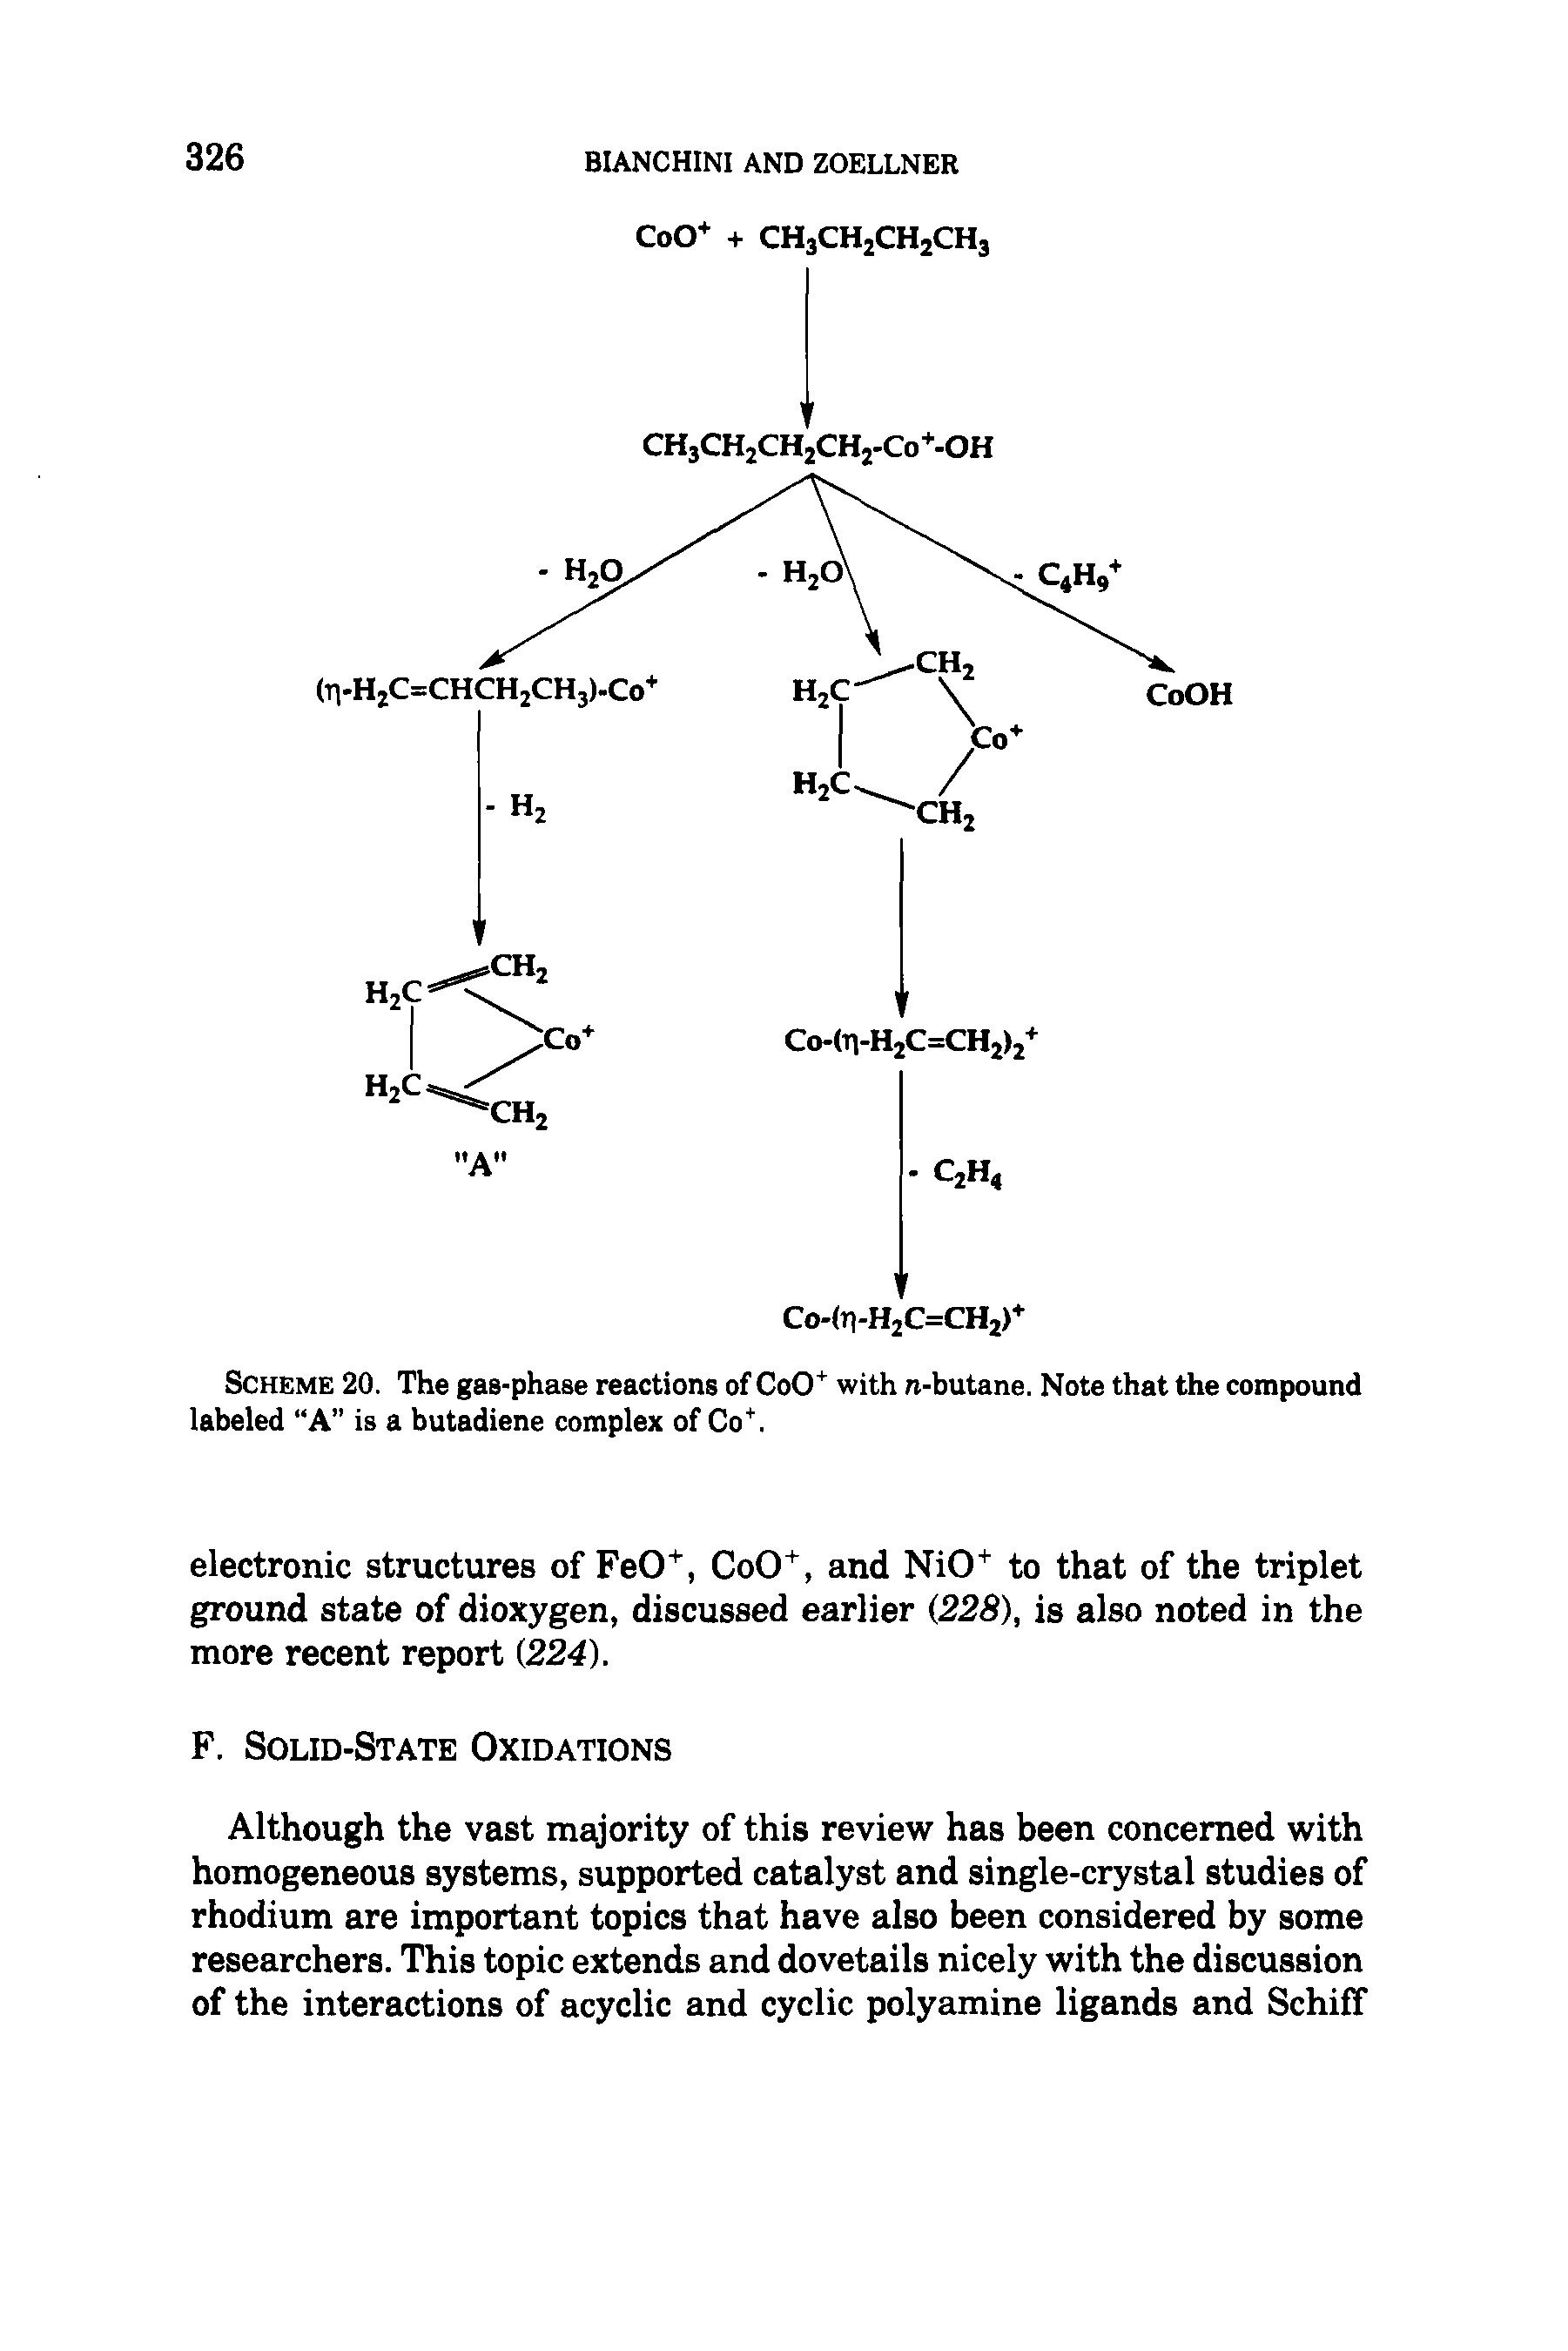 Scheme 20. The gas-phase reactions of CoO+ with n-butane. Note that the compound labeled A is a butadiene complex of Co+.